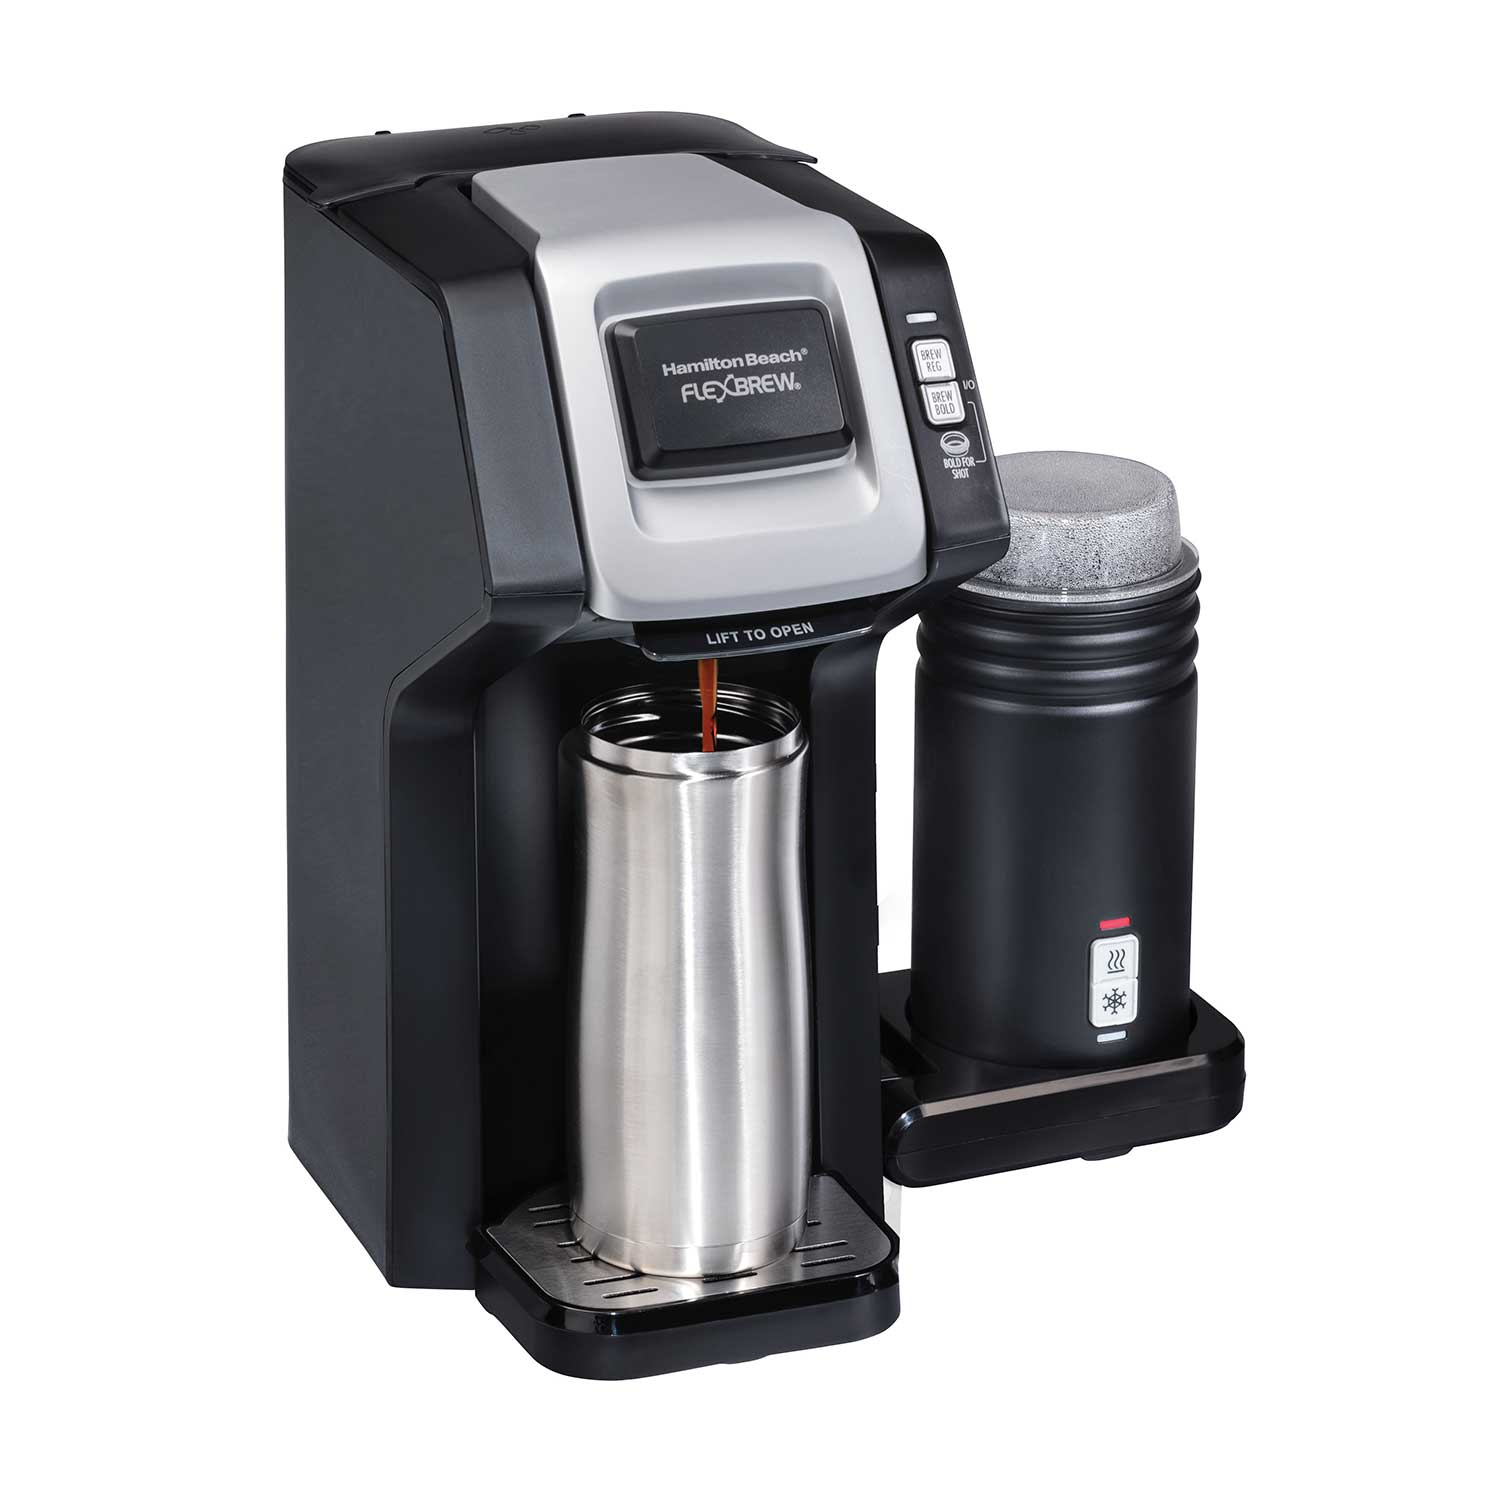 FlexBrew® Dual Coffee Maker with Milk Frother Black & Stainless Steel